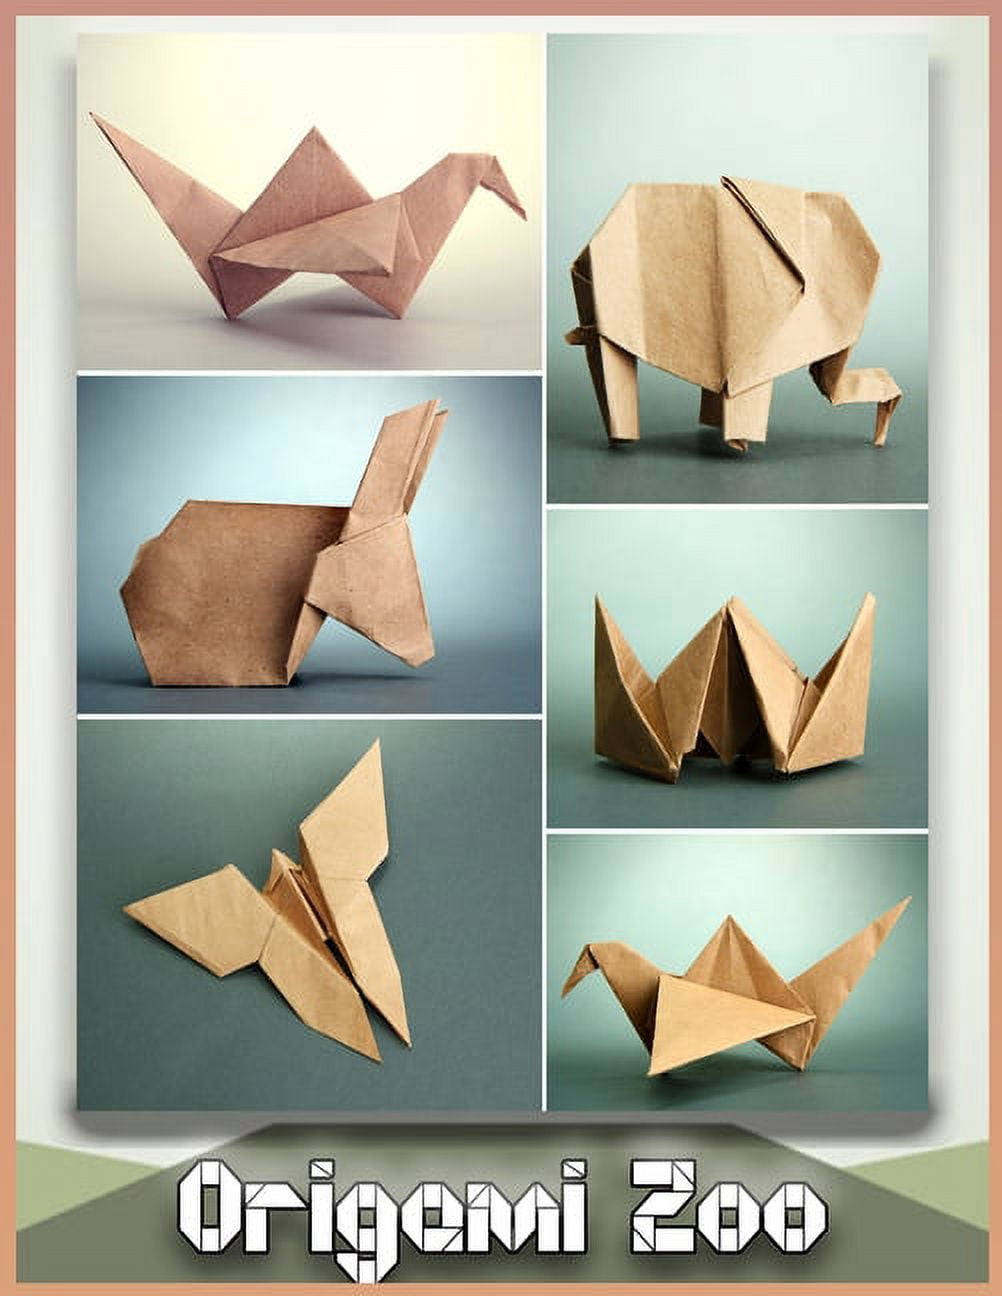 Origami Made Simple: Animal Origami for the Enthusiast-easy